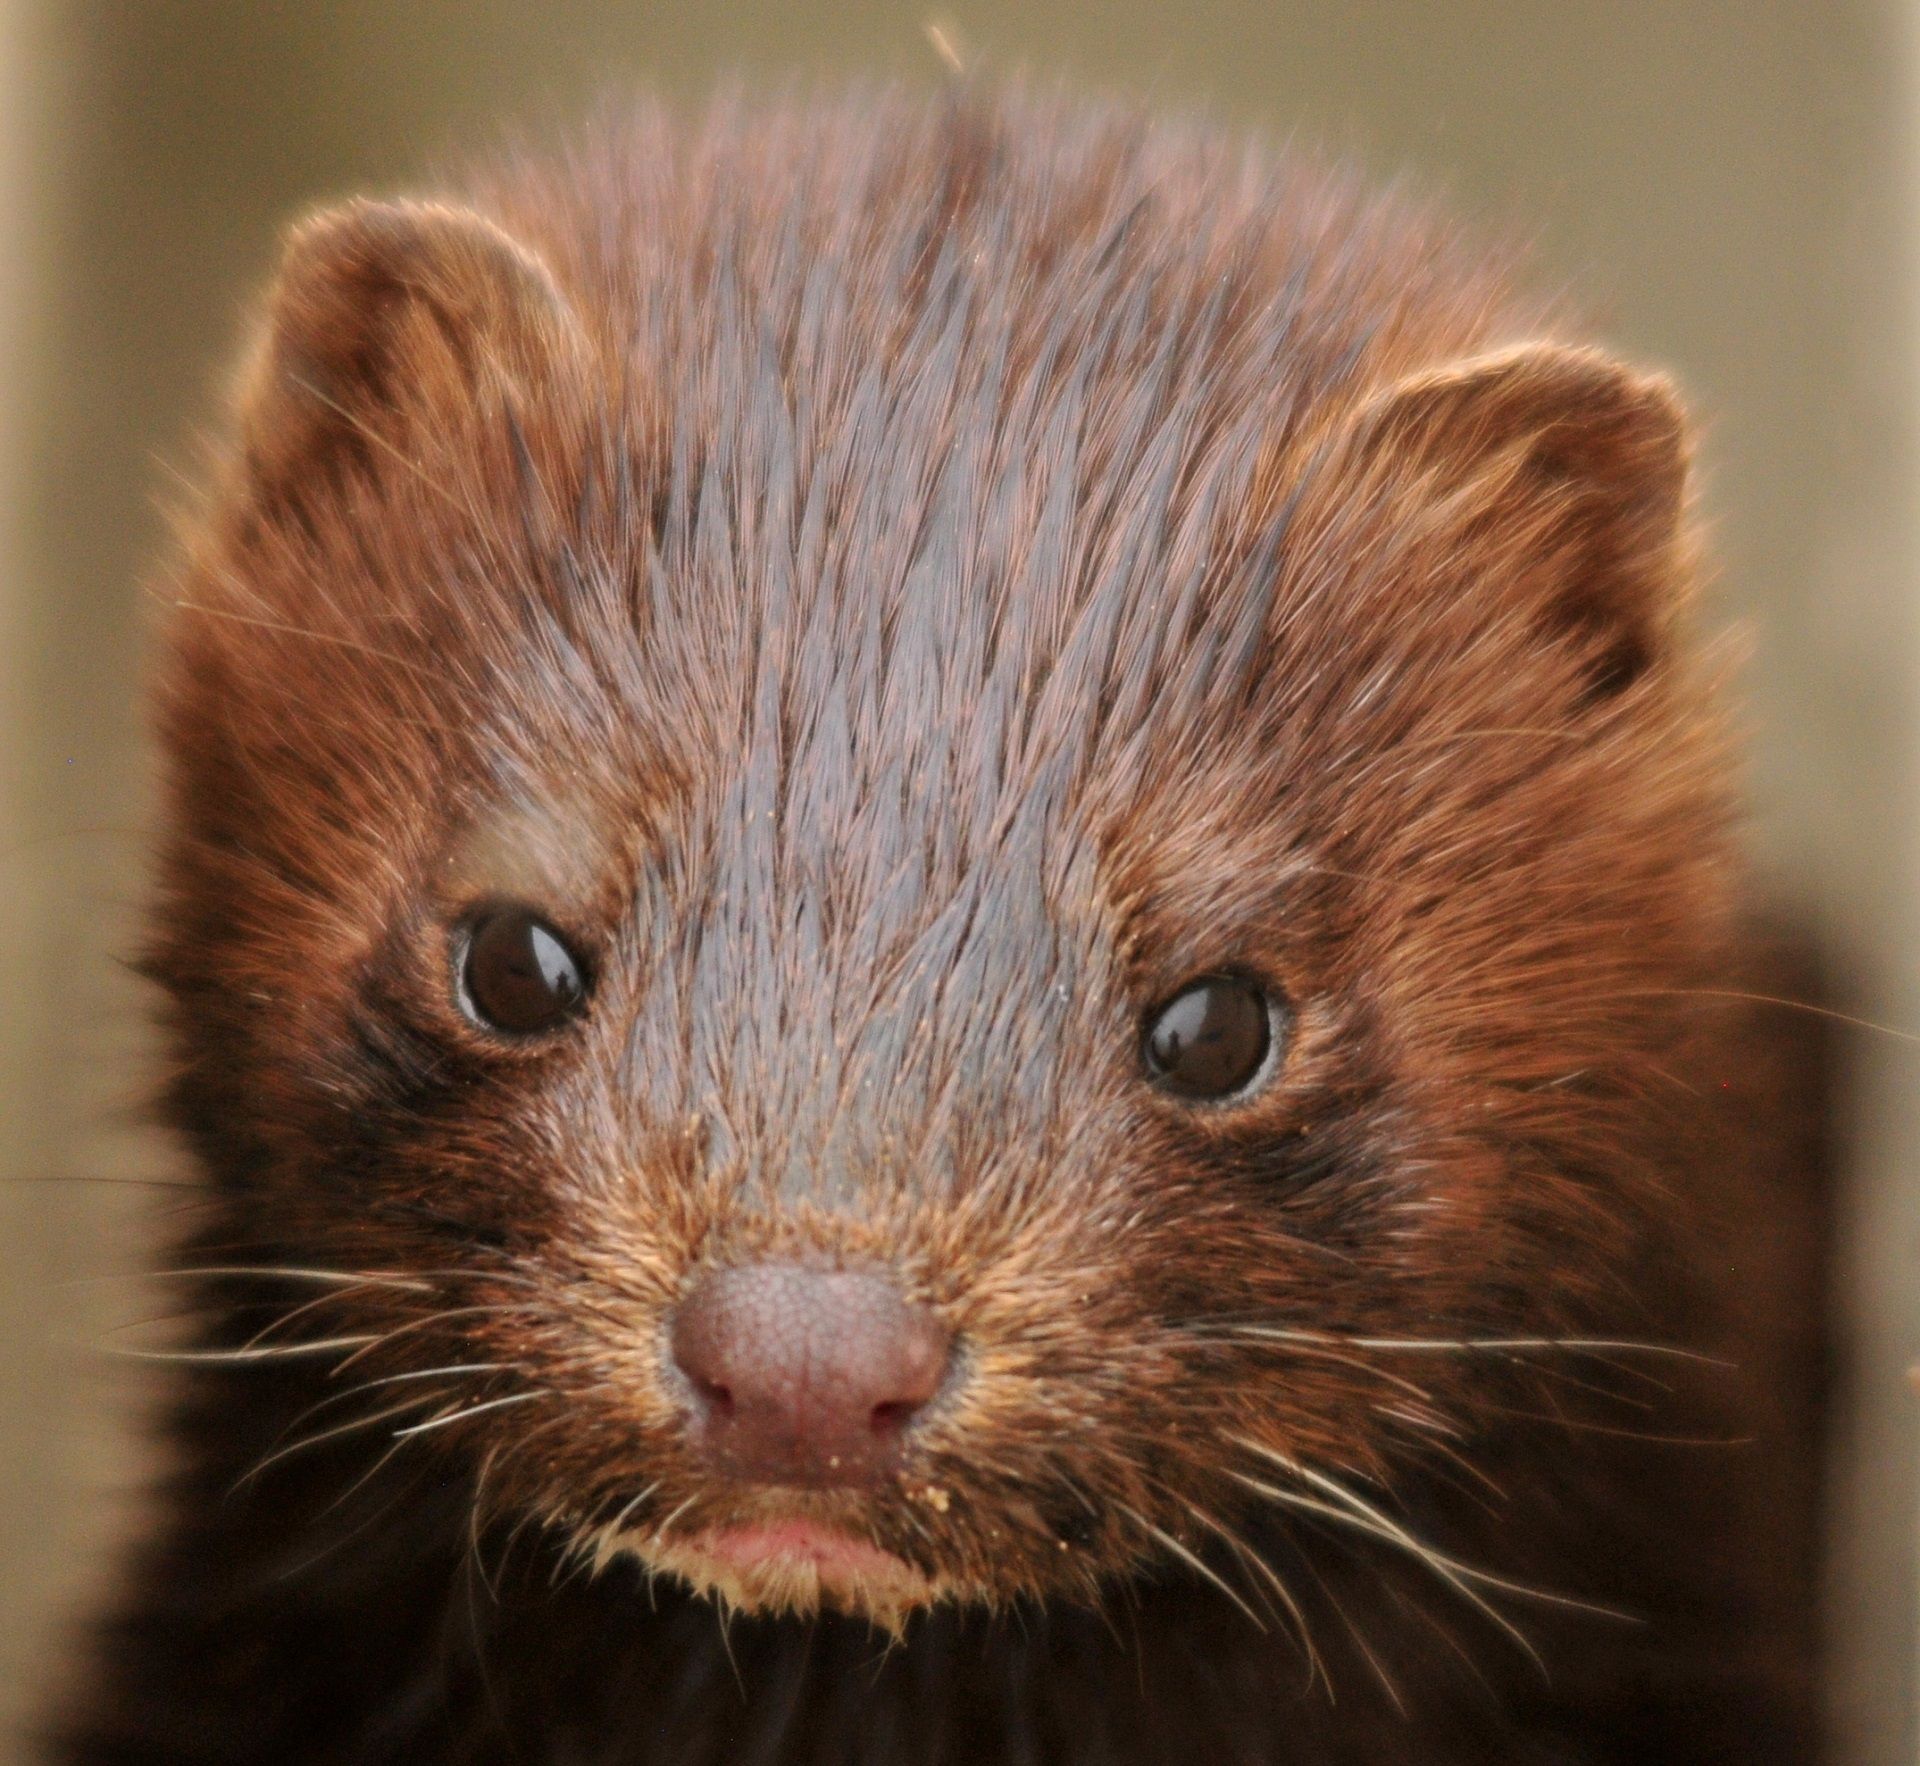 Government criticised for delaying mink-saving measures  